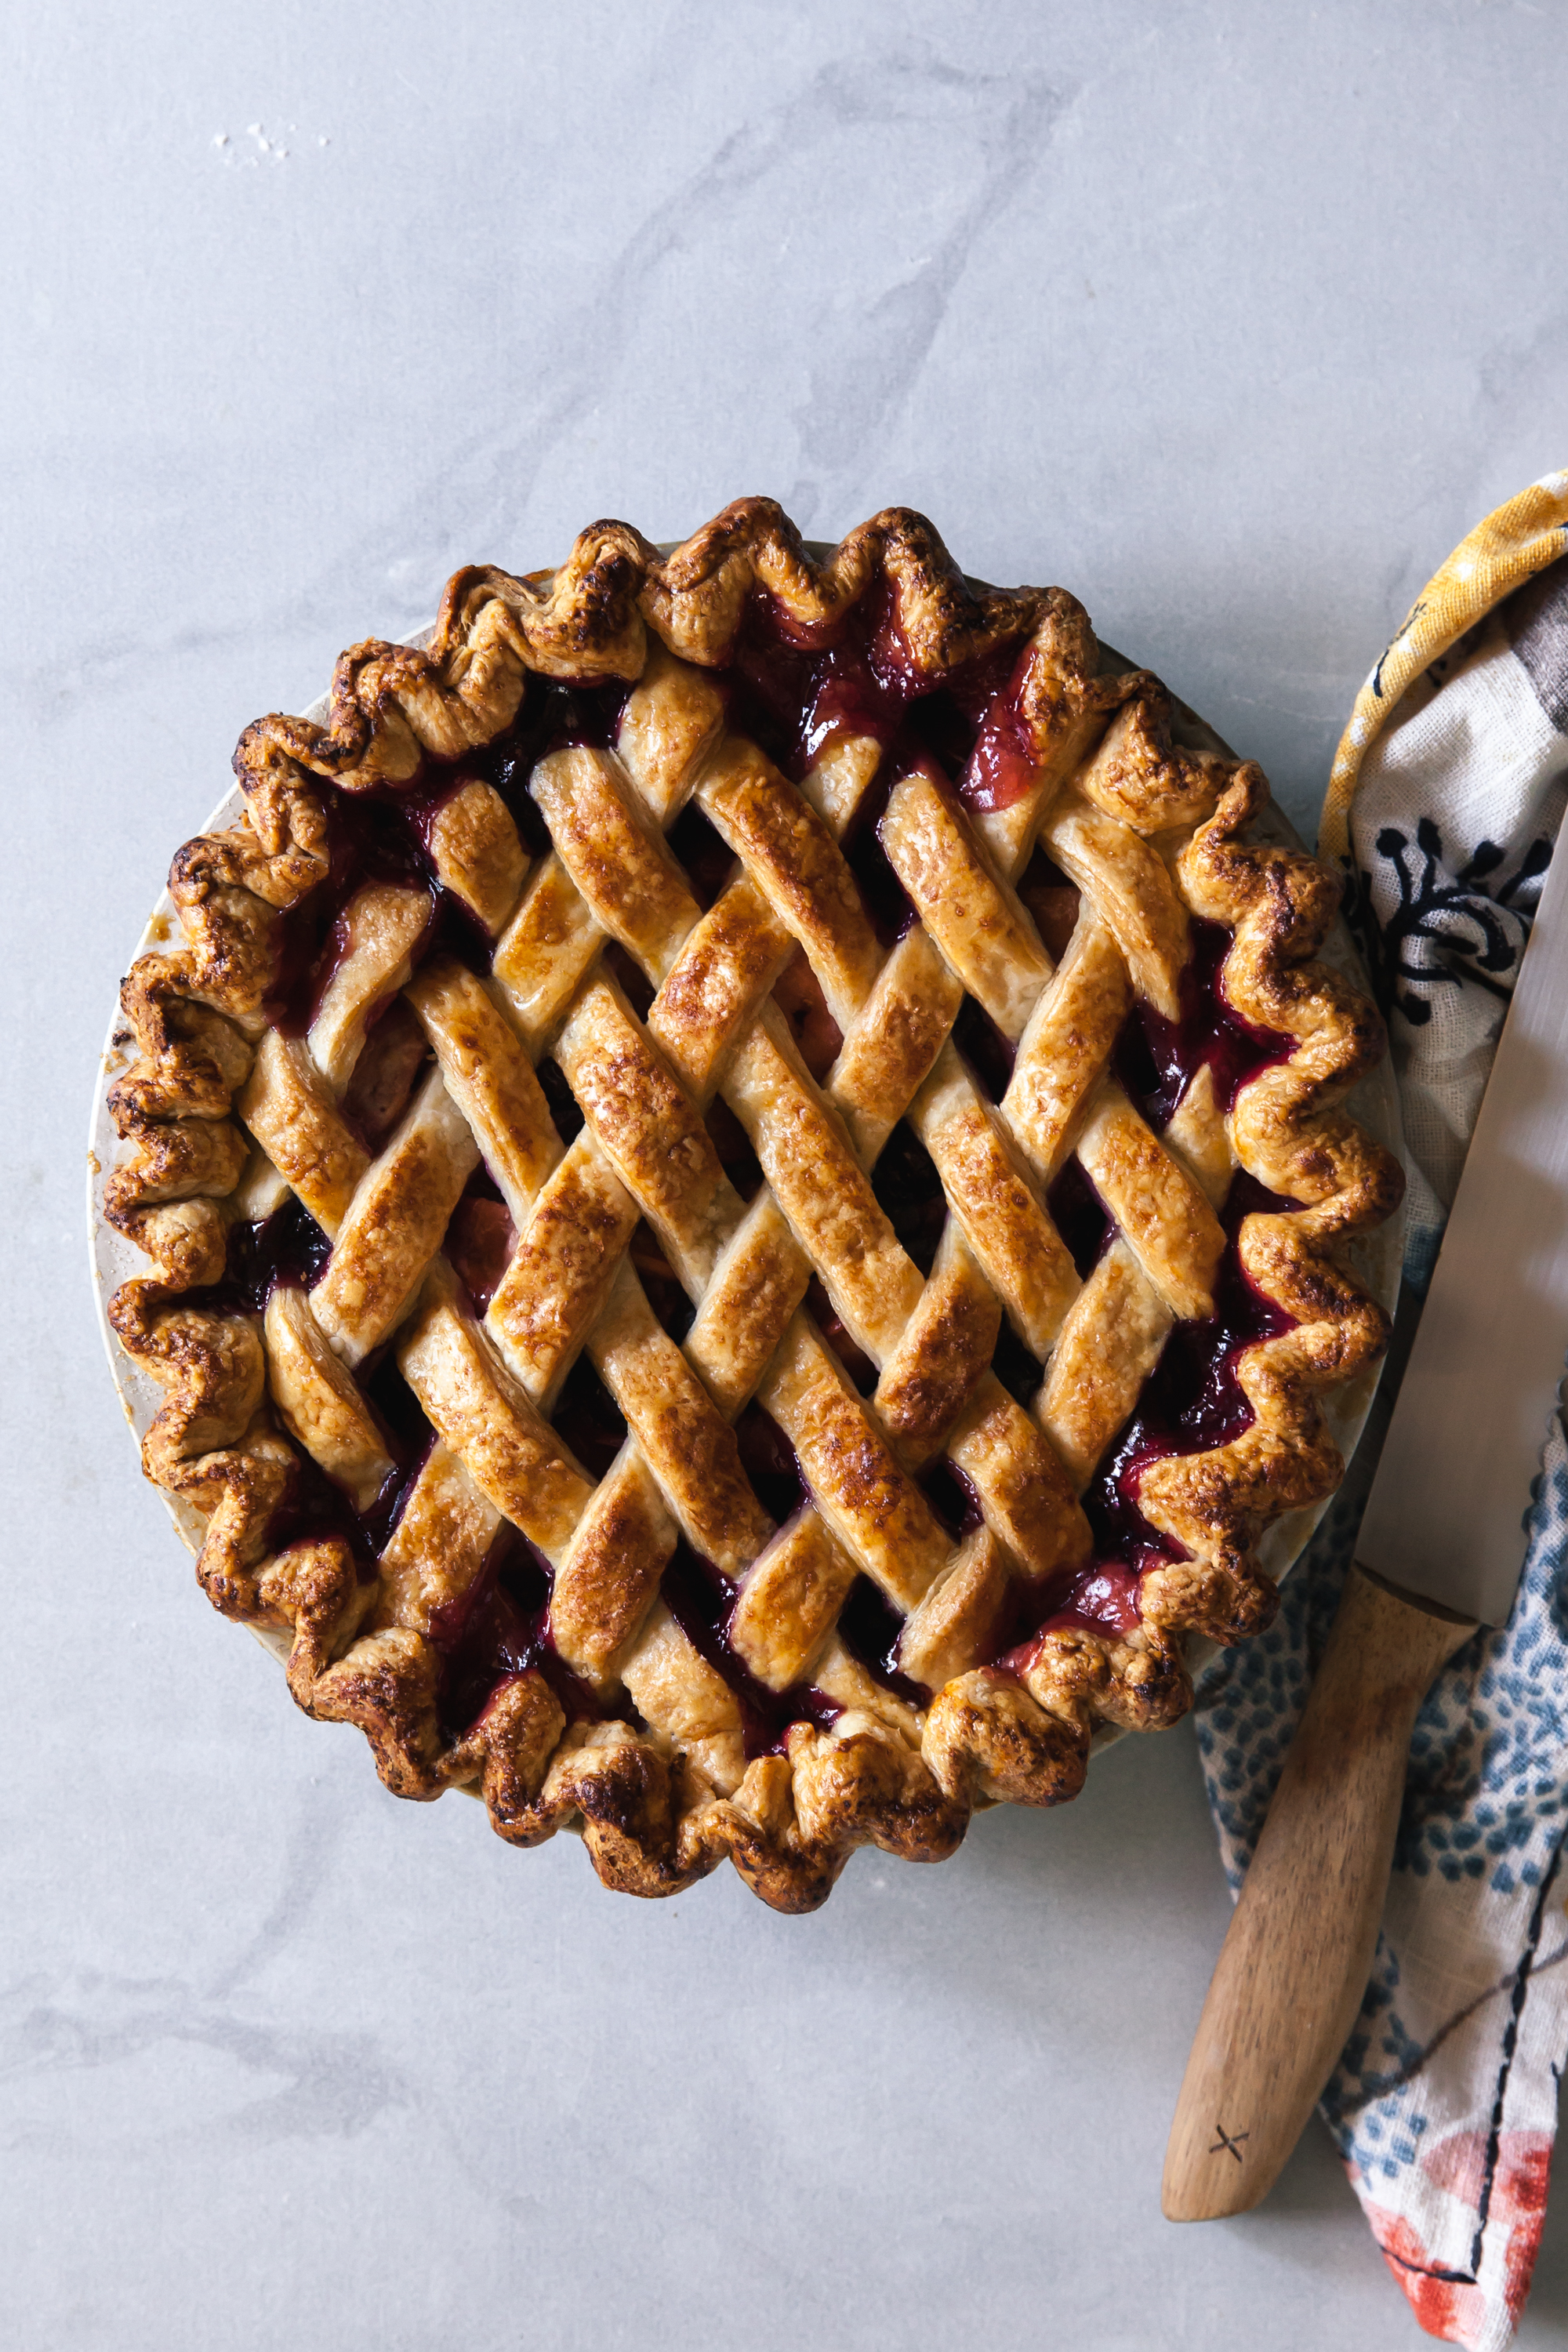 Blueberry Peach Pie Recipe with apricots and lattice crust.